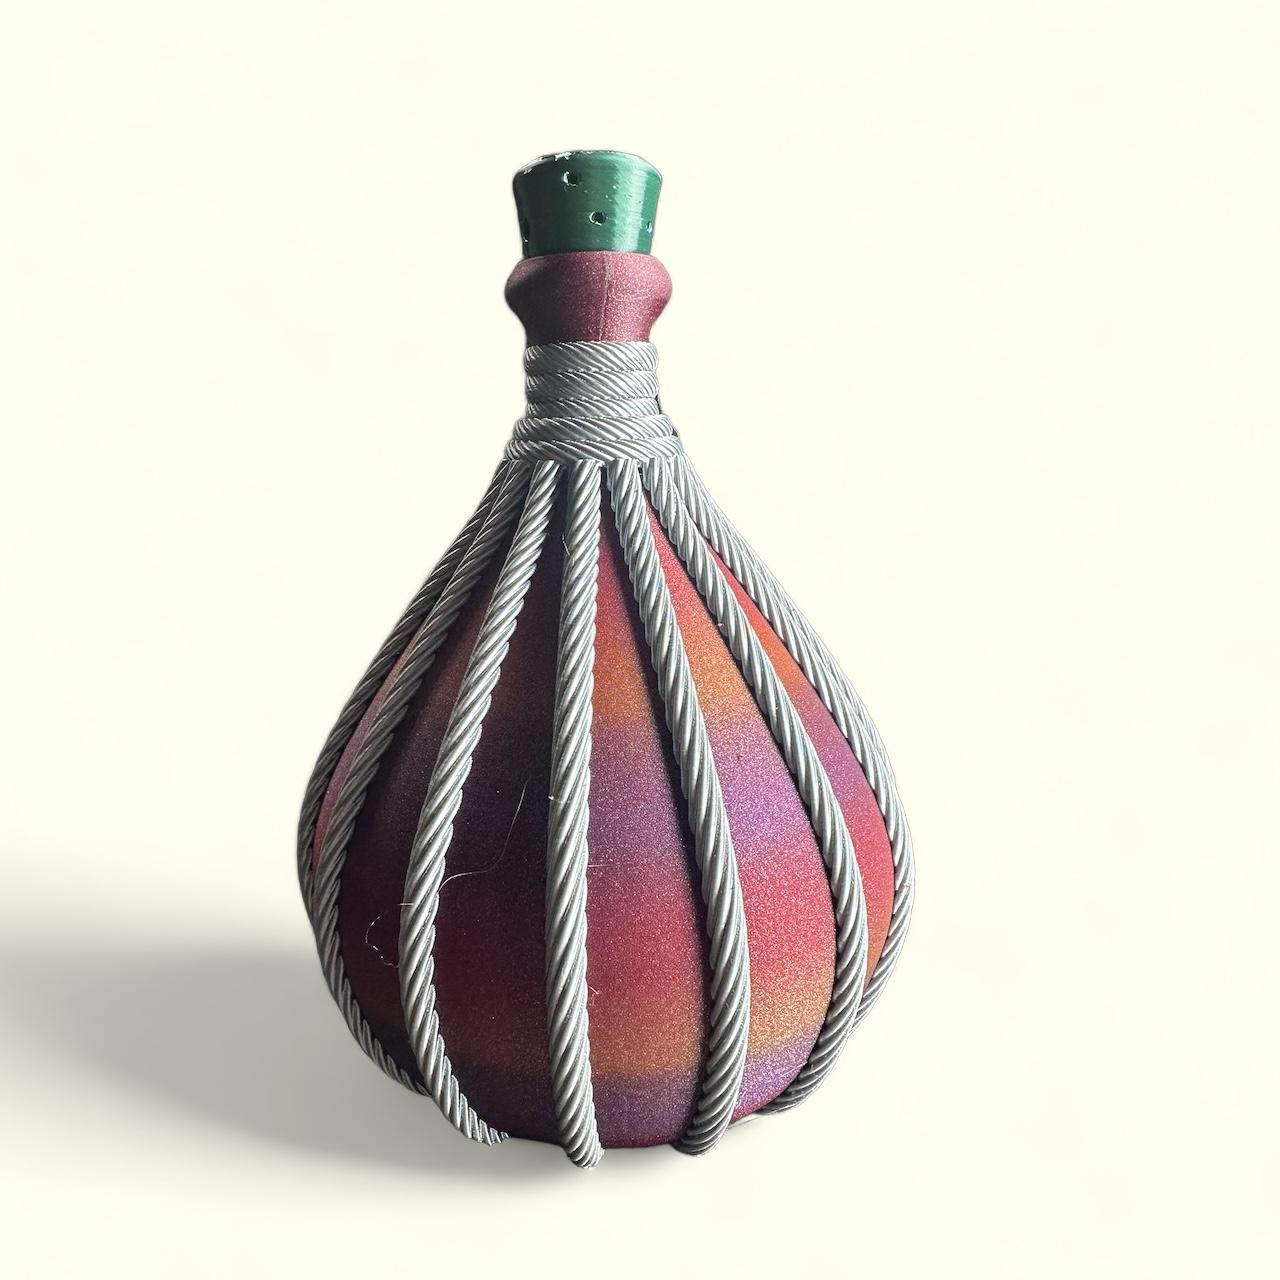 Pirate Mead Flask/Jug - Rum Flask for the high seas cosplay 3d model